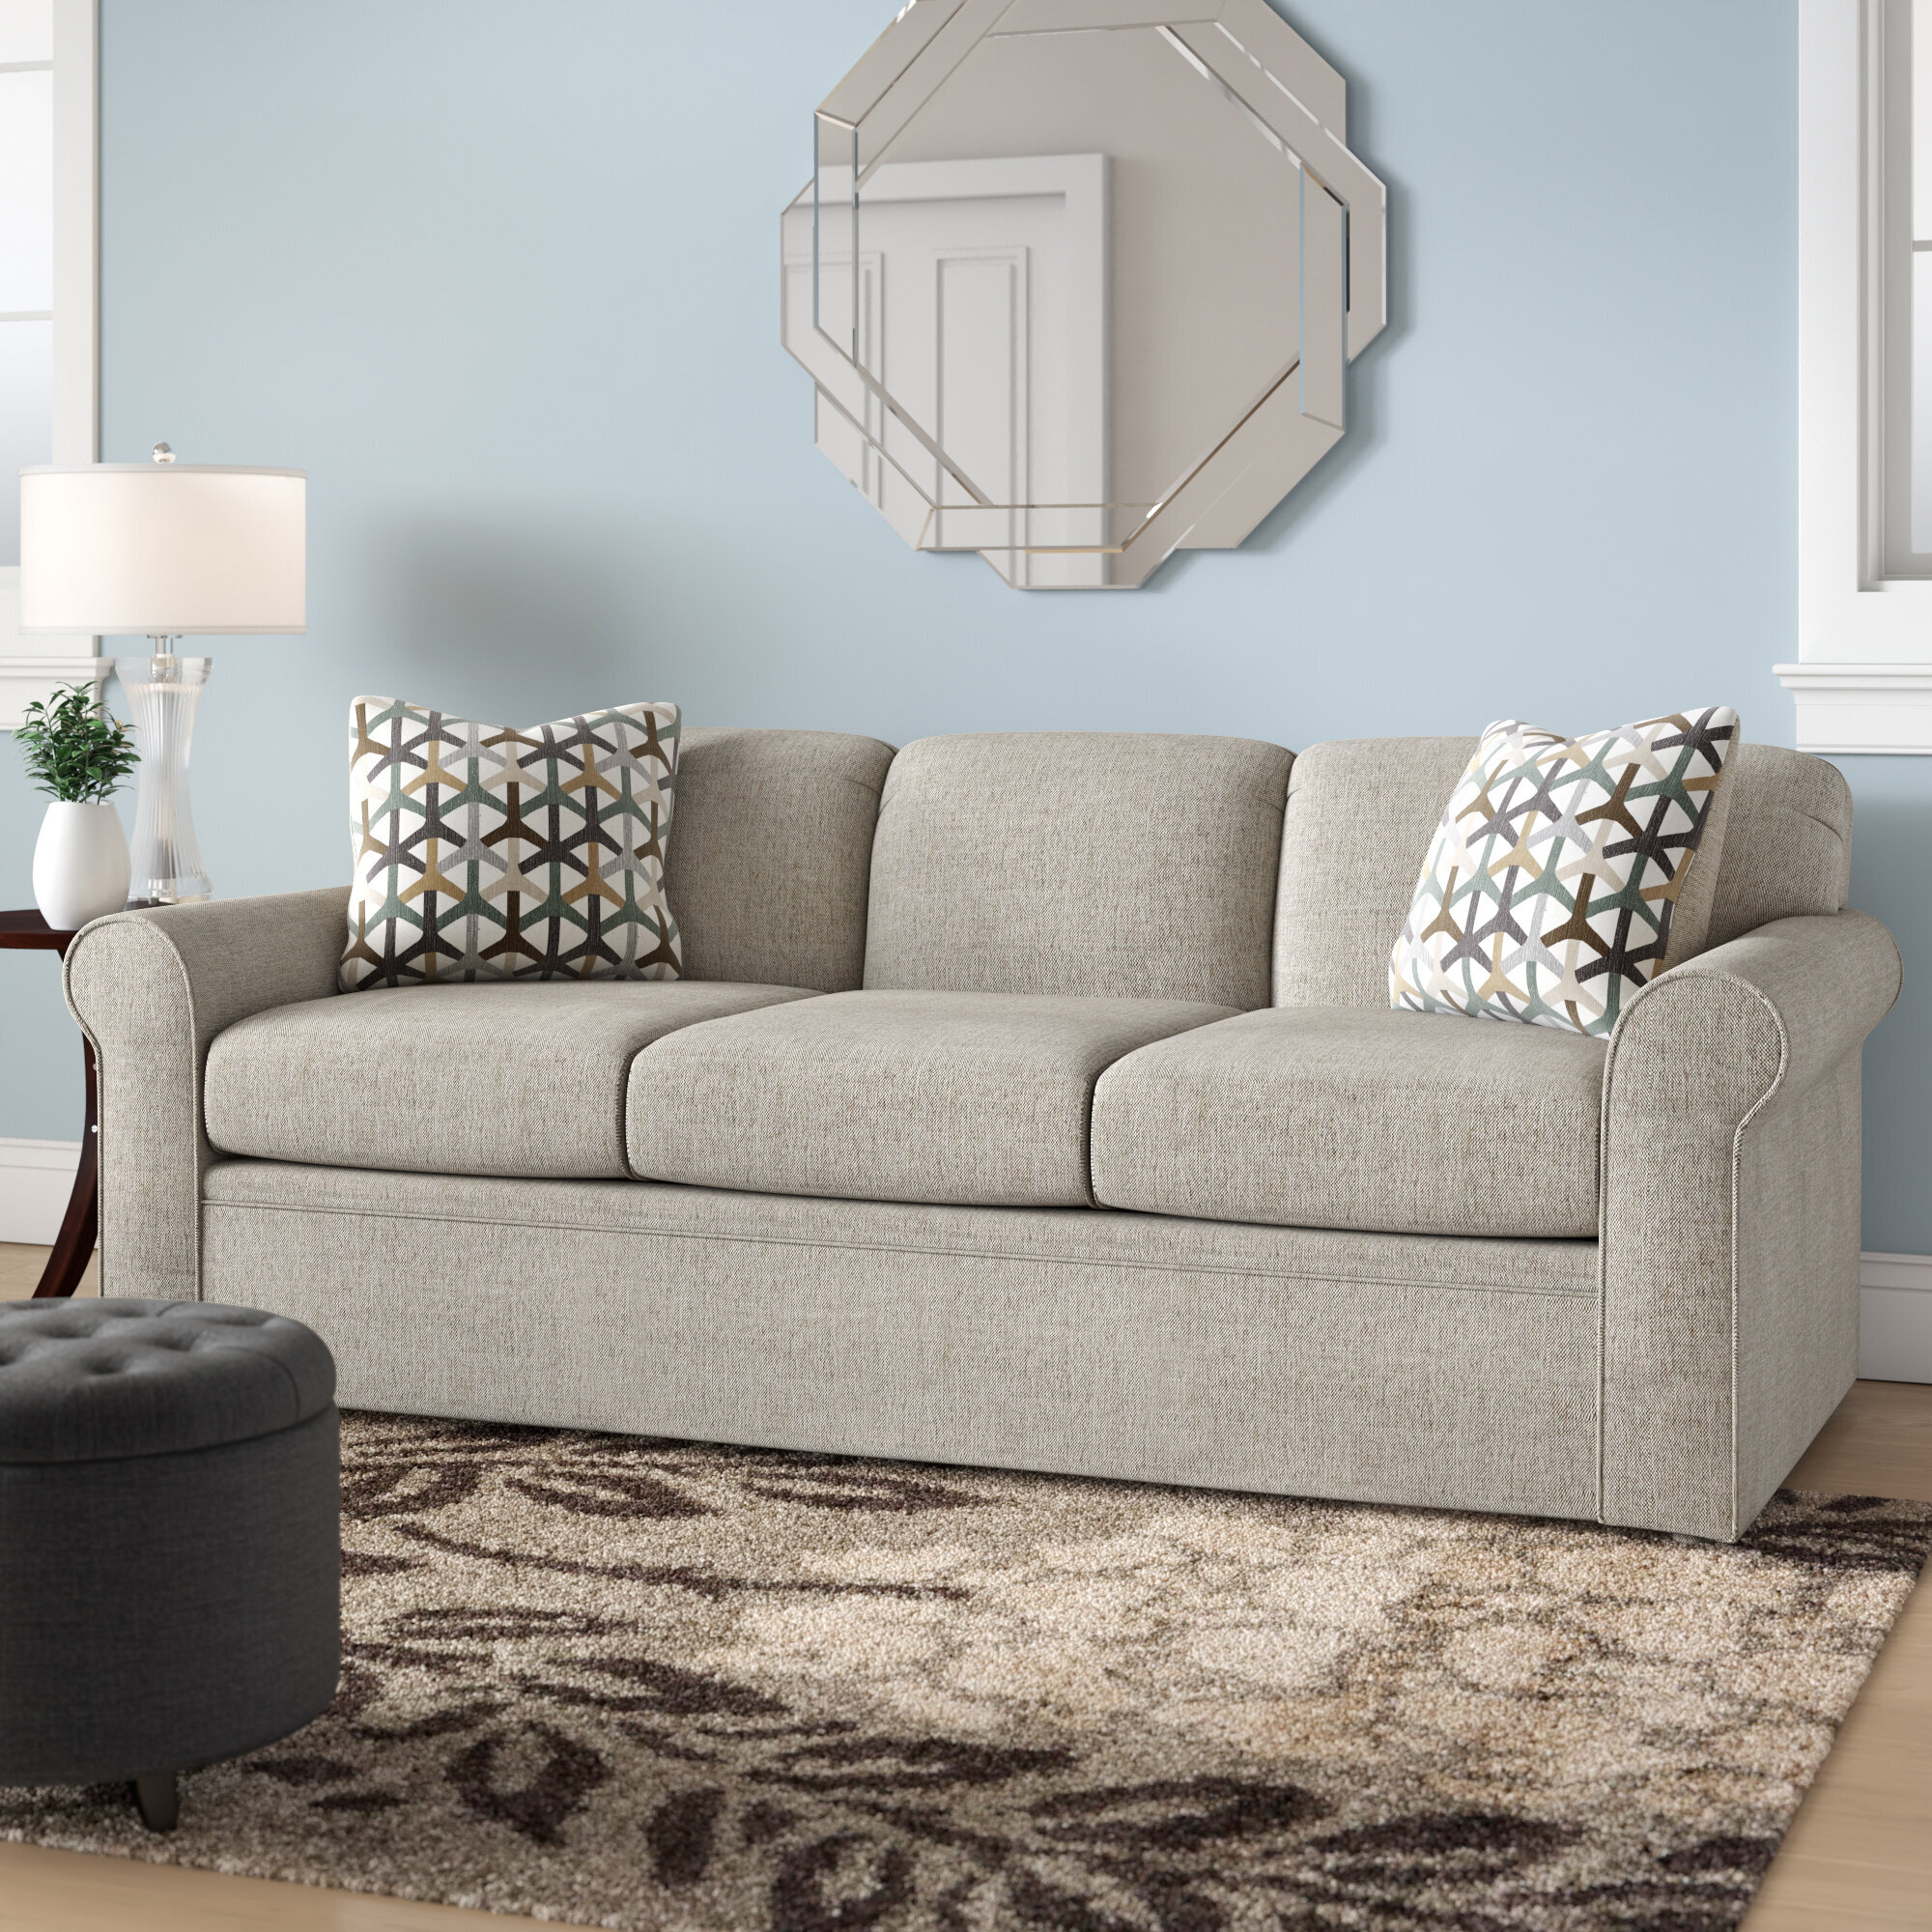 Small Couch for Small Spaces Grey SURFLINE Pull Out Couch Sleeper Sofa Bed Loveseat Sleeper with Memory Foam Mattress Twin Velvet Loveseat Sofa Bed with Storage Pocket and 2 Throw Pillows